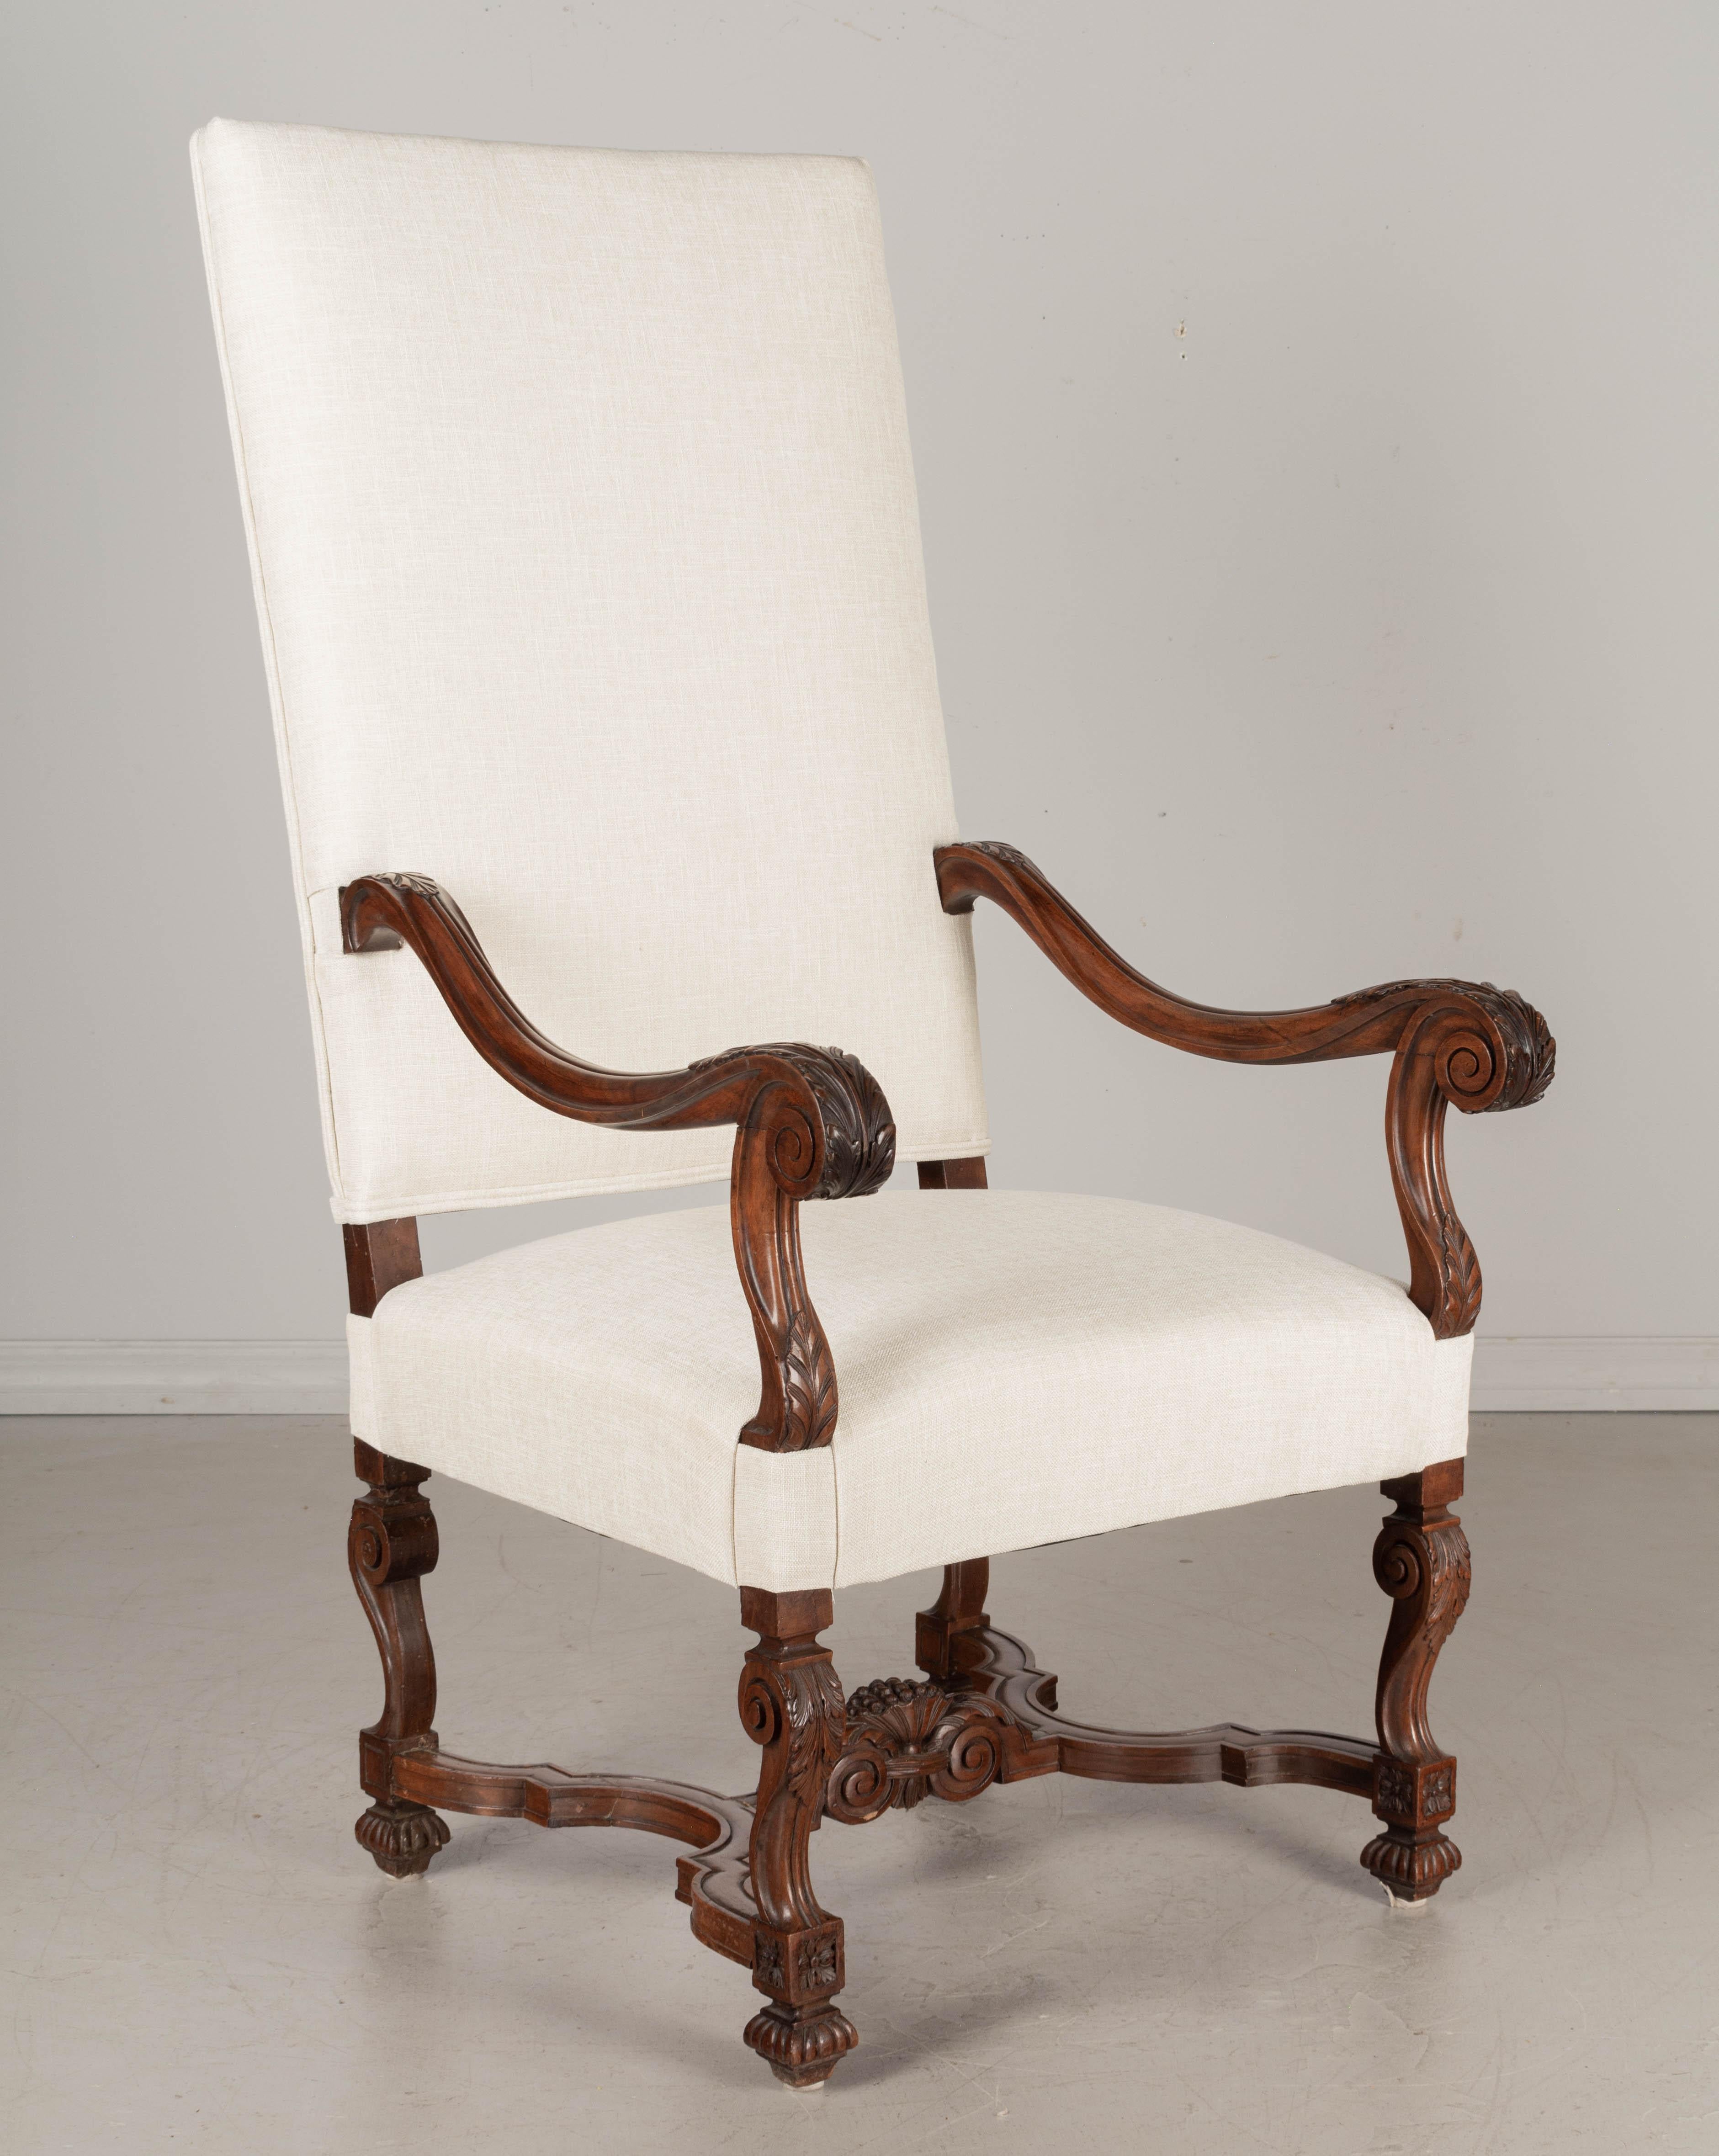 A 19th century Louis XIII style French fauteuil, or arm chair, made of solid walnut. Beautiful hand-carved details including sculptural scrolled arms and legs with acanthus leaves, and x-form stretcher with center decoration. Great quality frame.